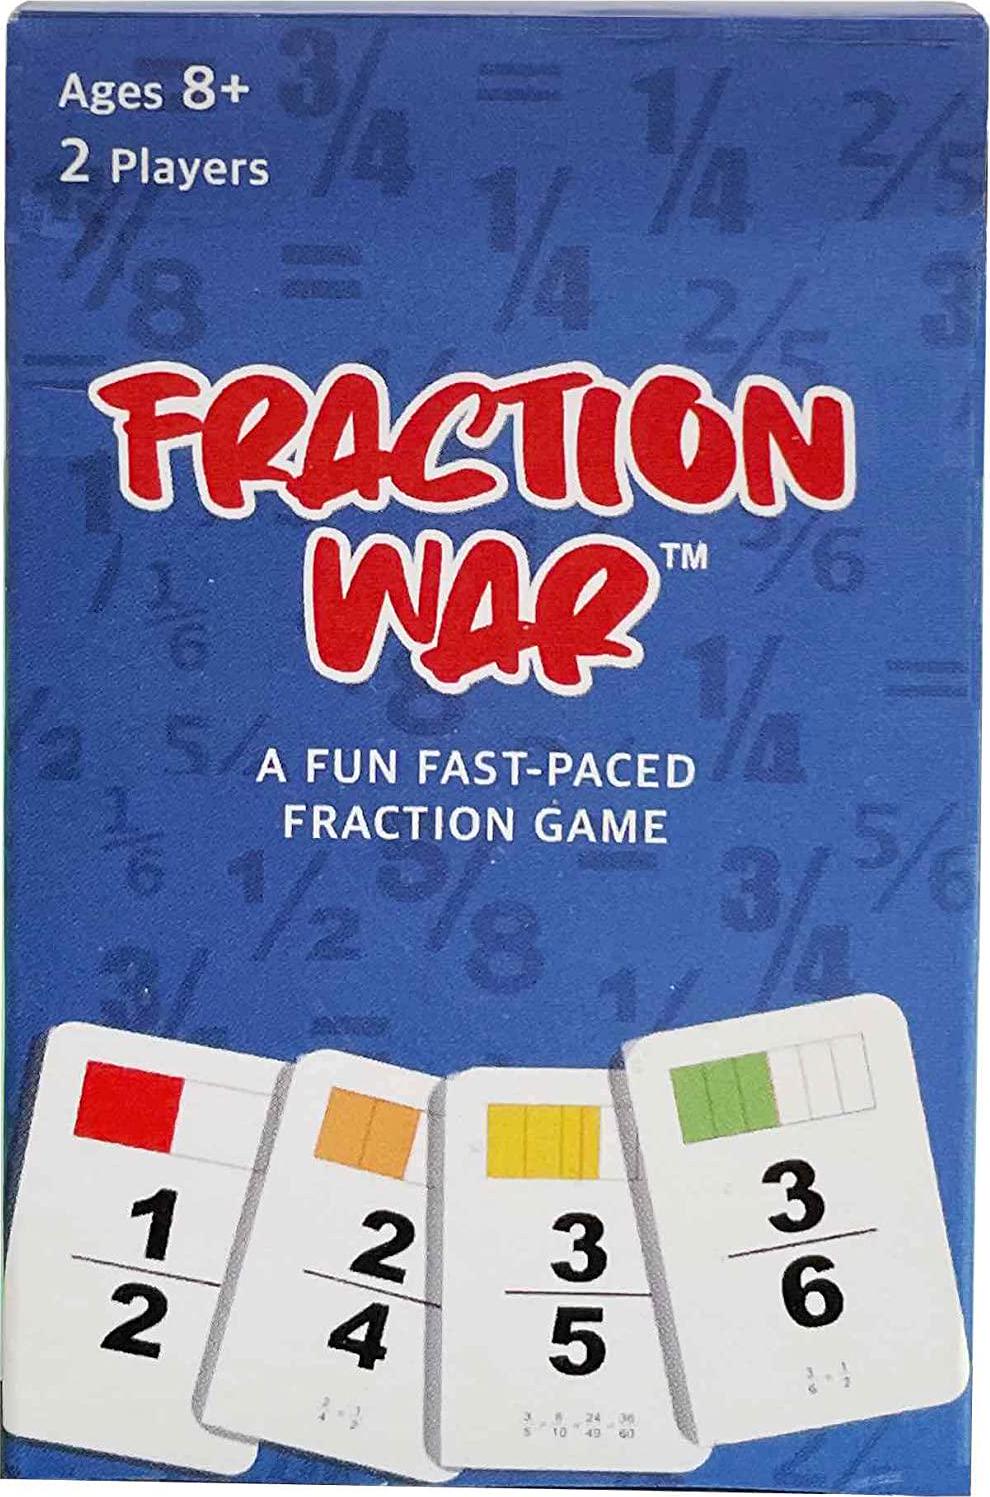 Math Magic Inc., Fraction War Math Game - Fun Math Game to Learn, Compare and Simplify Fractions for 2nd Grade, 3rd Grade, 4th Grade, 5th Grade (1 Pack - Red White and Blue)